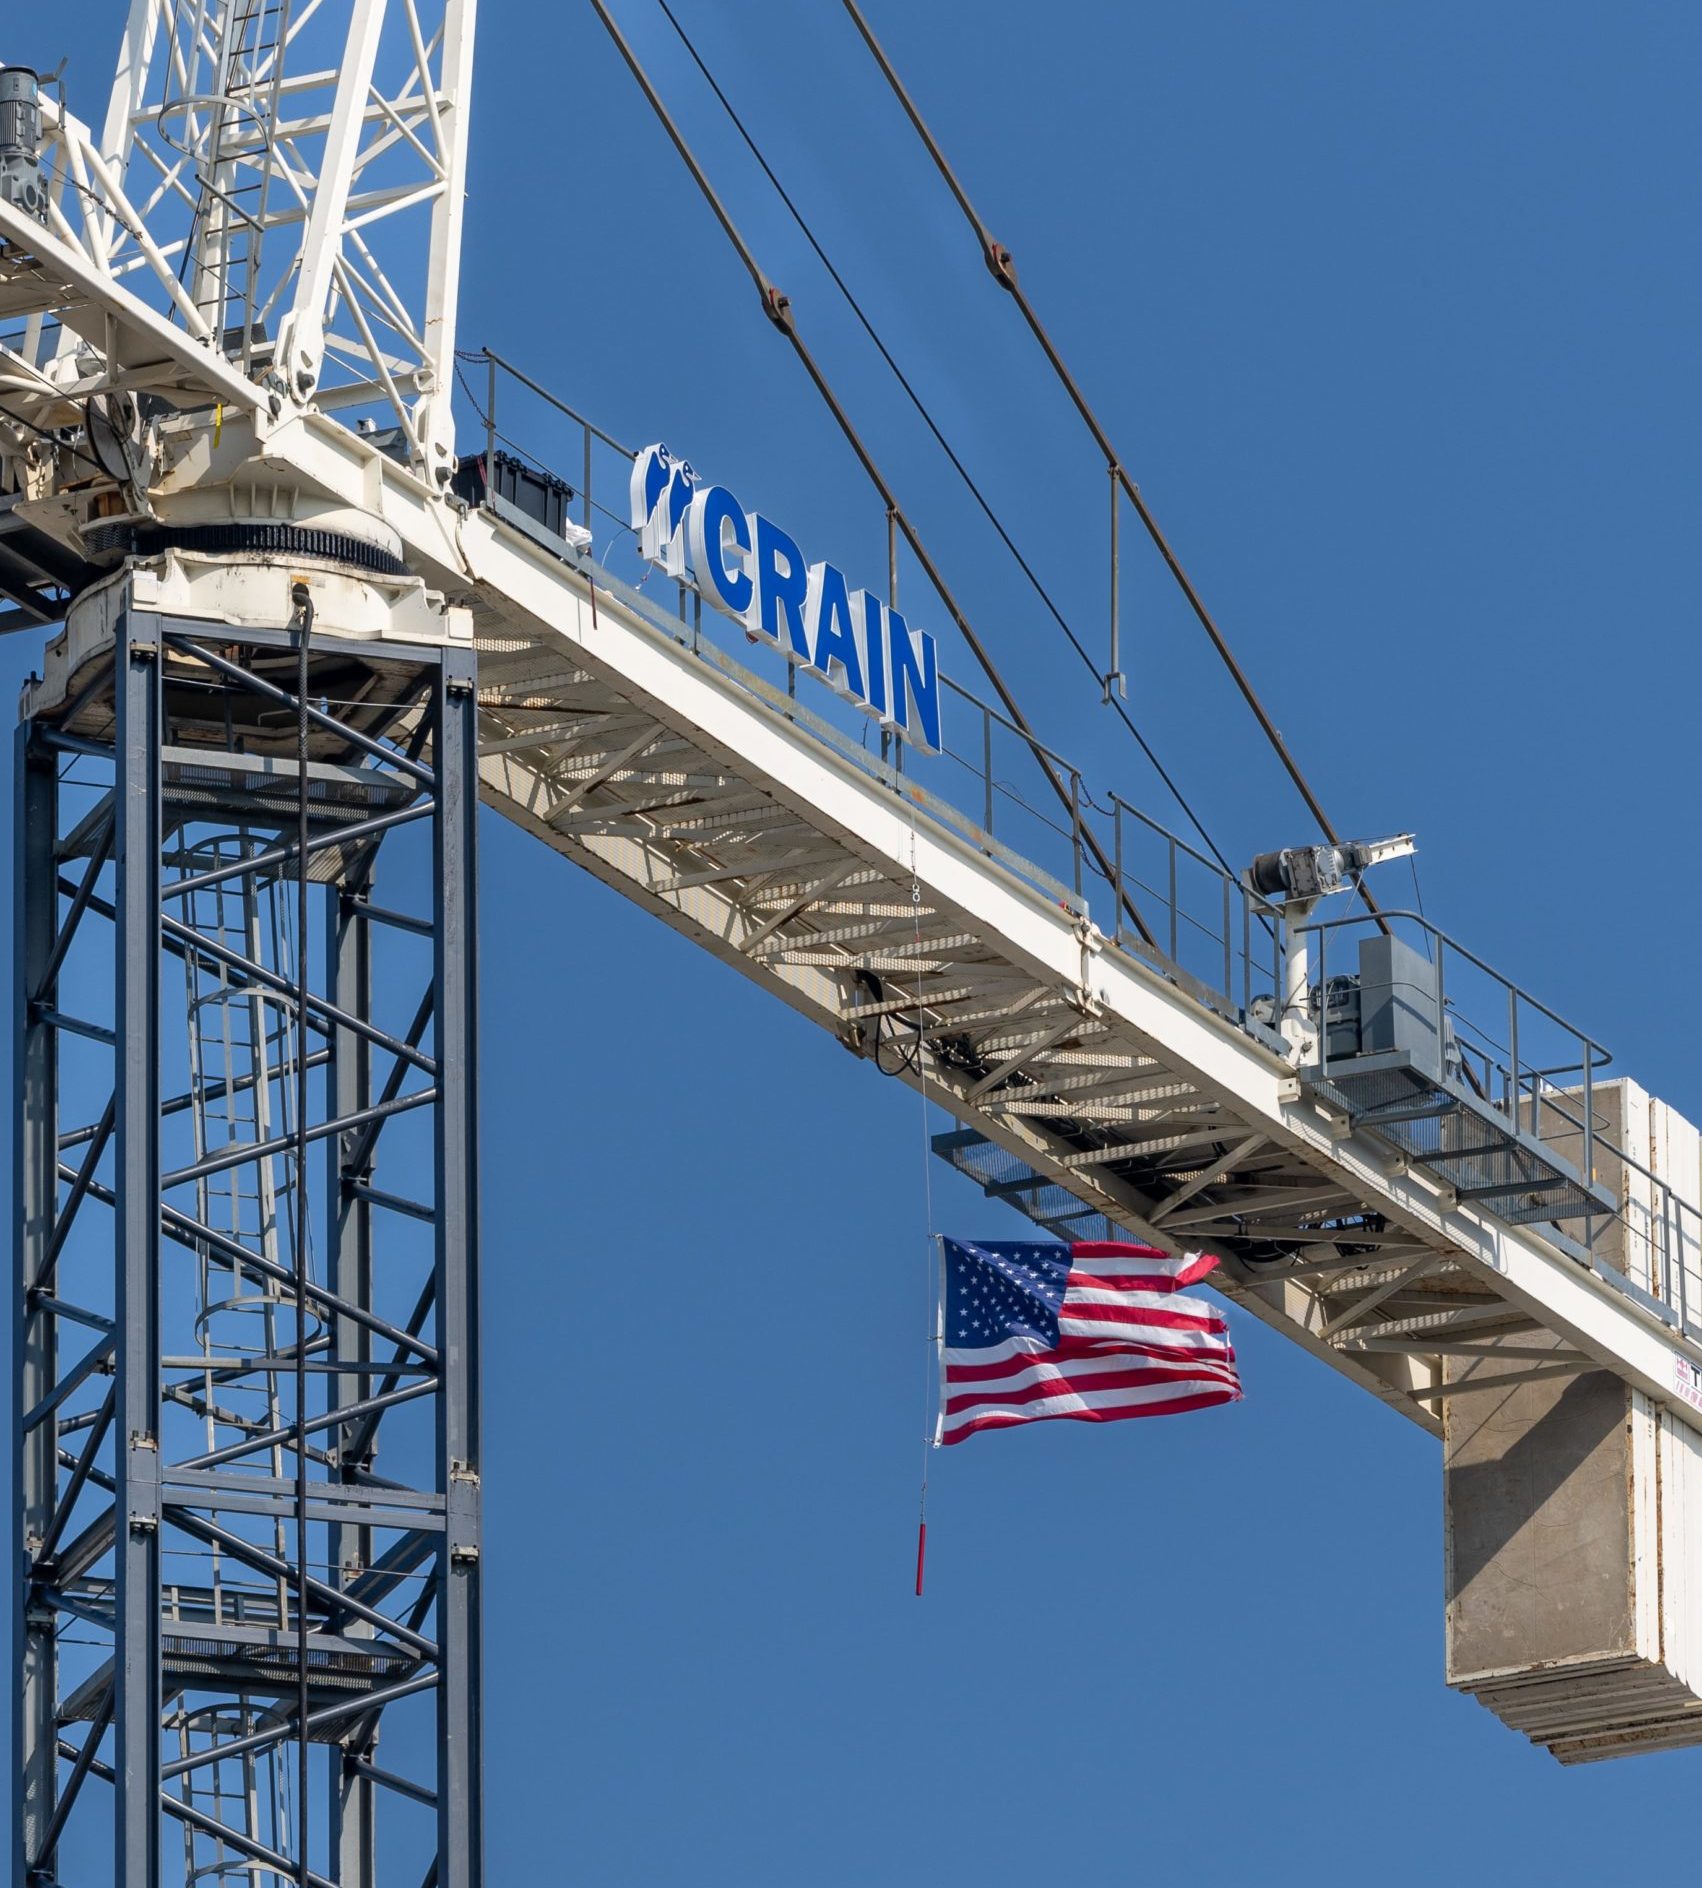 American flag hanging from Crain structure